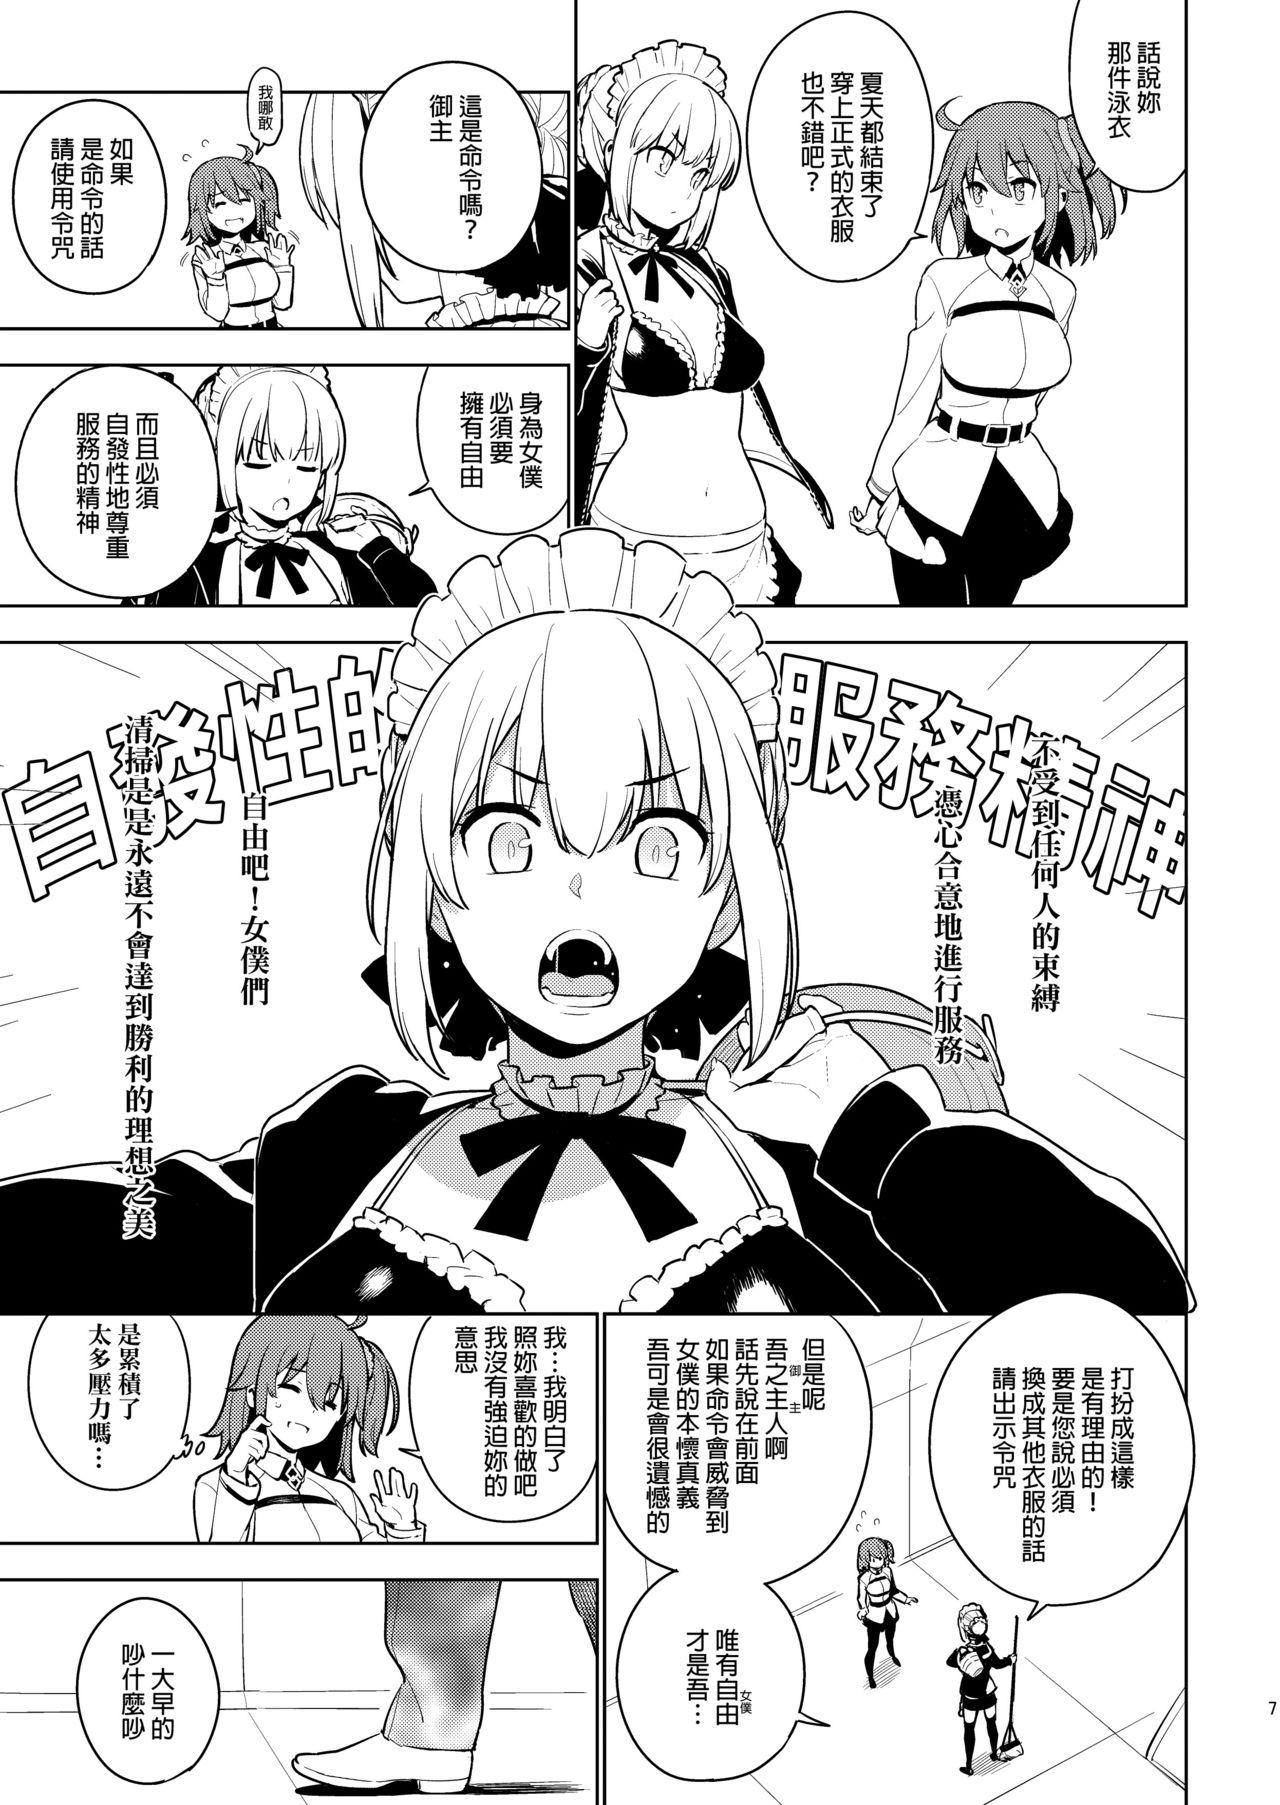 Orgasms DELUSION - Fate grand order Beurette - Page 6